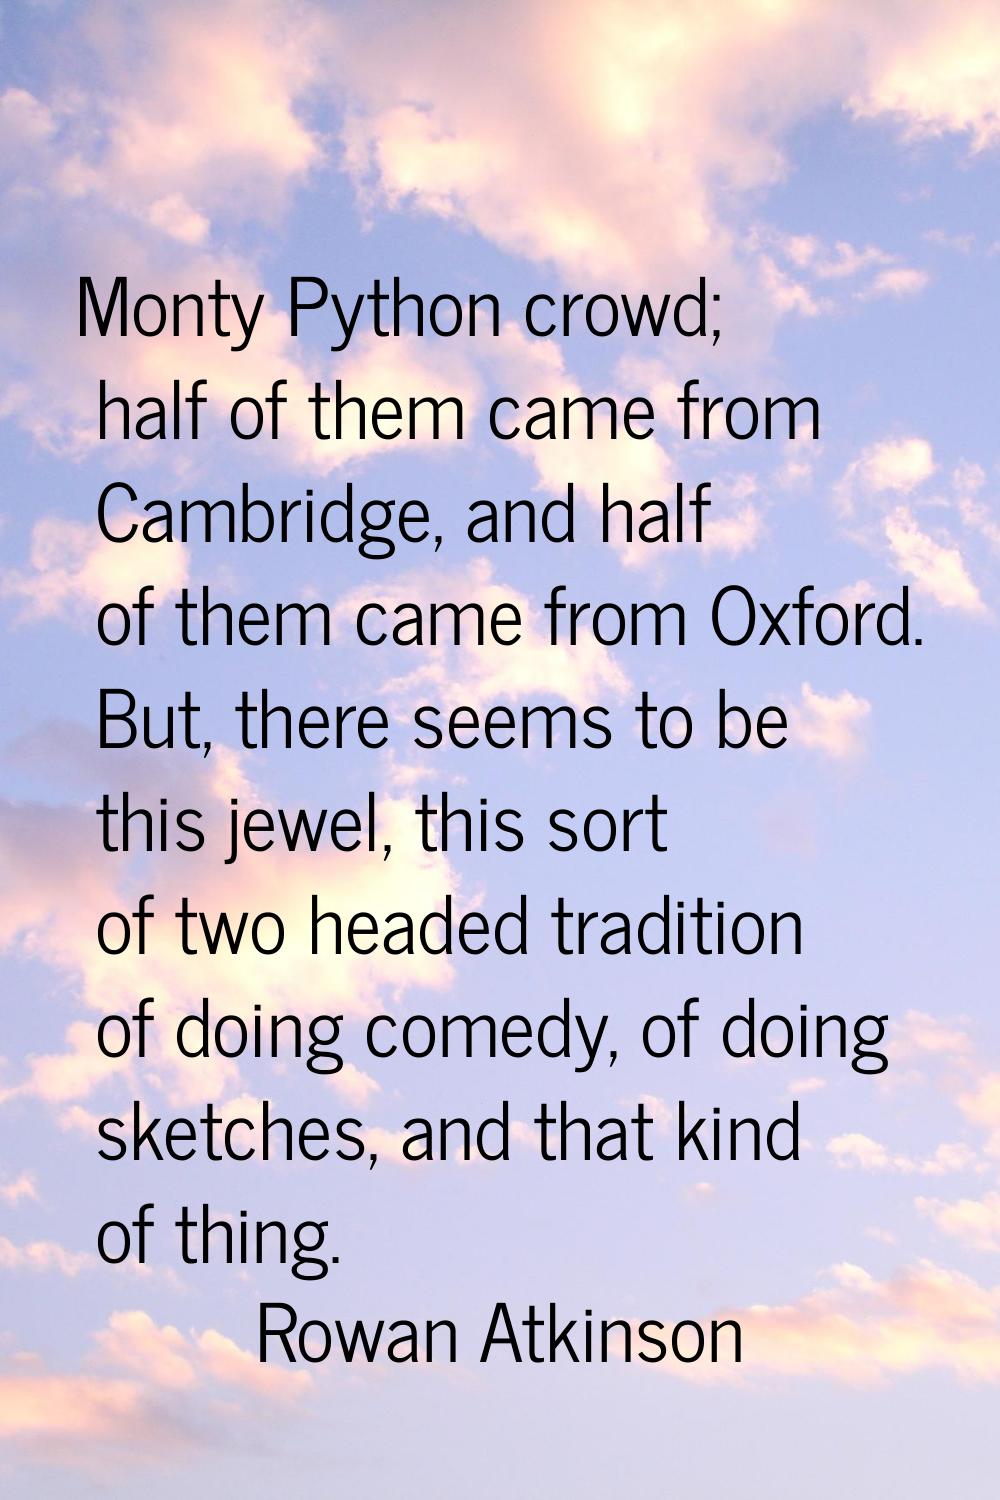 Monty Python crowd; half of them came from Cambridge, and half of them came from Oxford. But, there